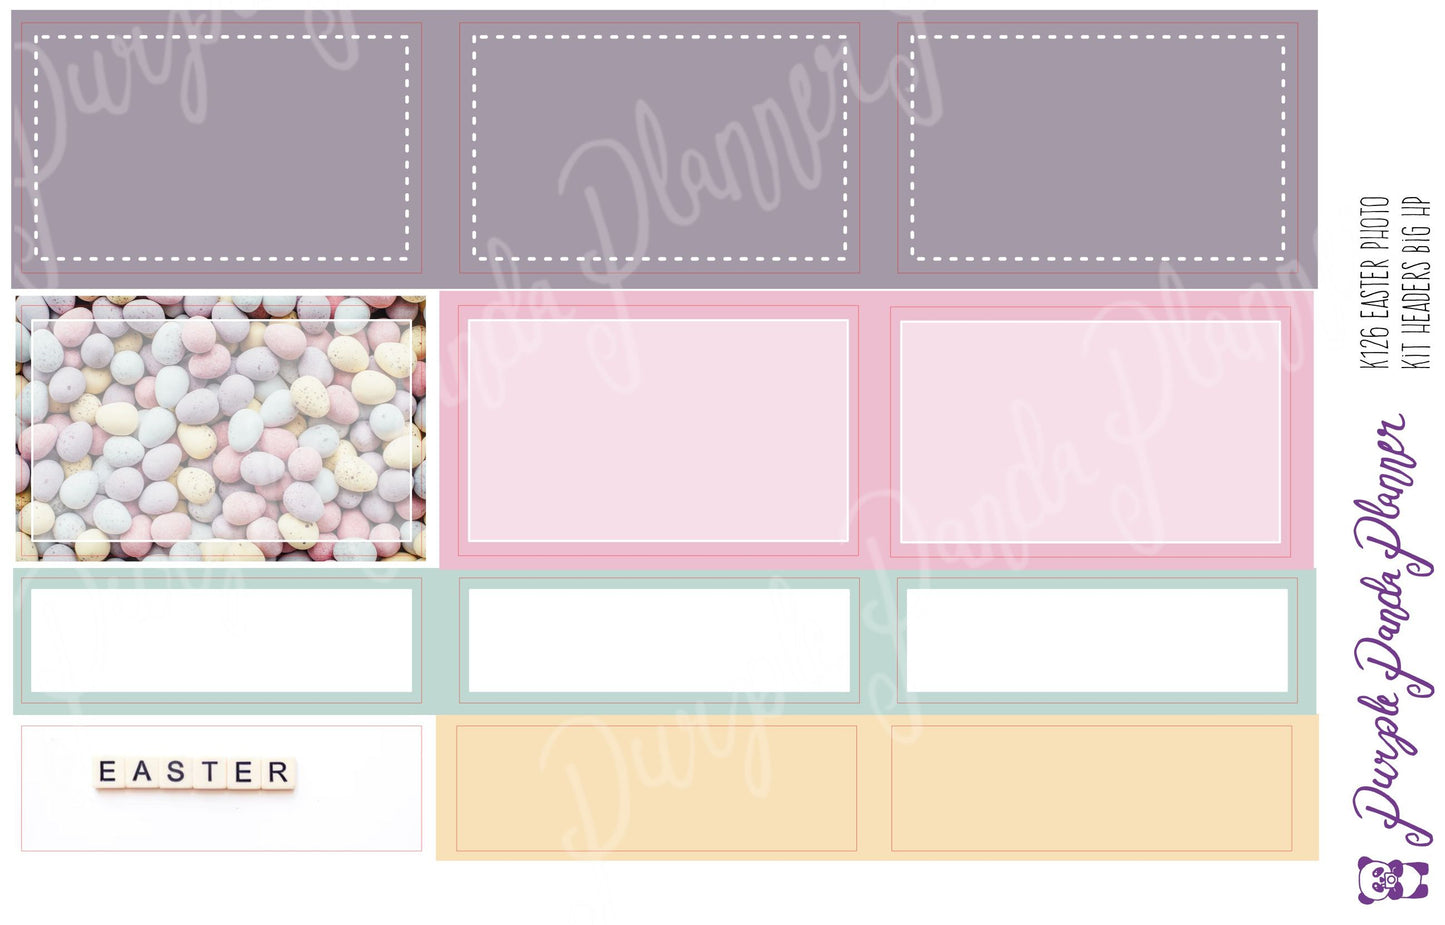 HP Big -Pastel Easter Photo Kit for Planner or Bullet Journal, Functional Stickers (K123)